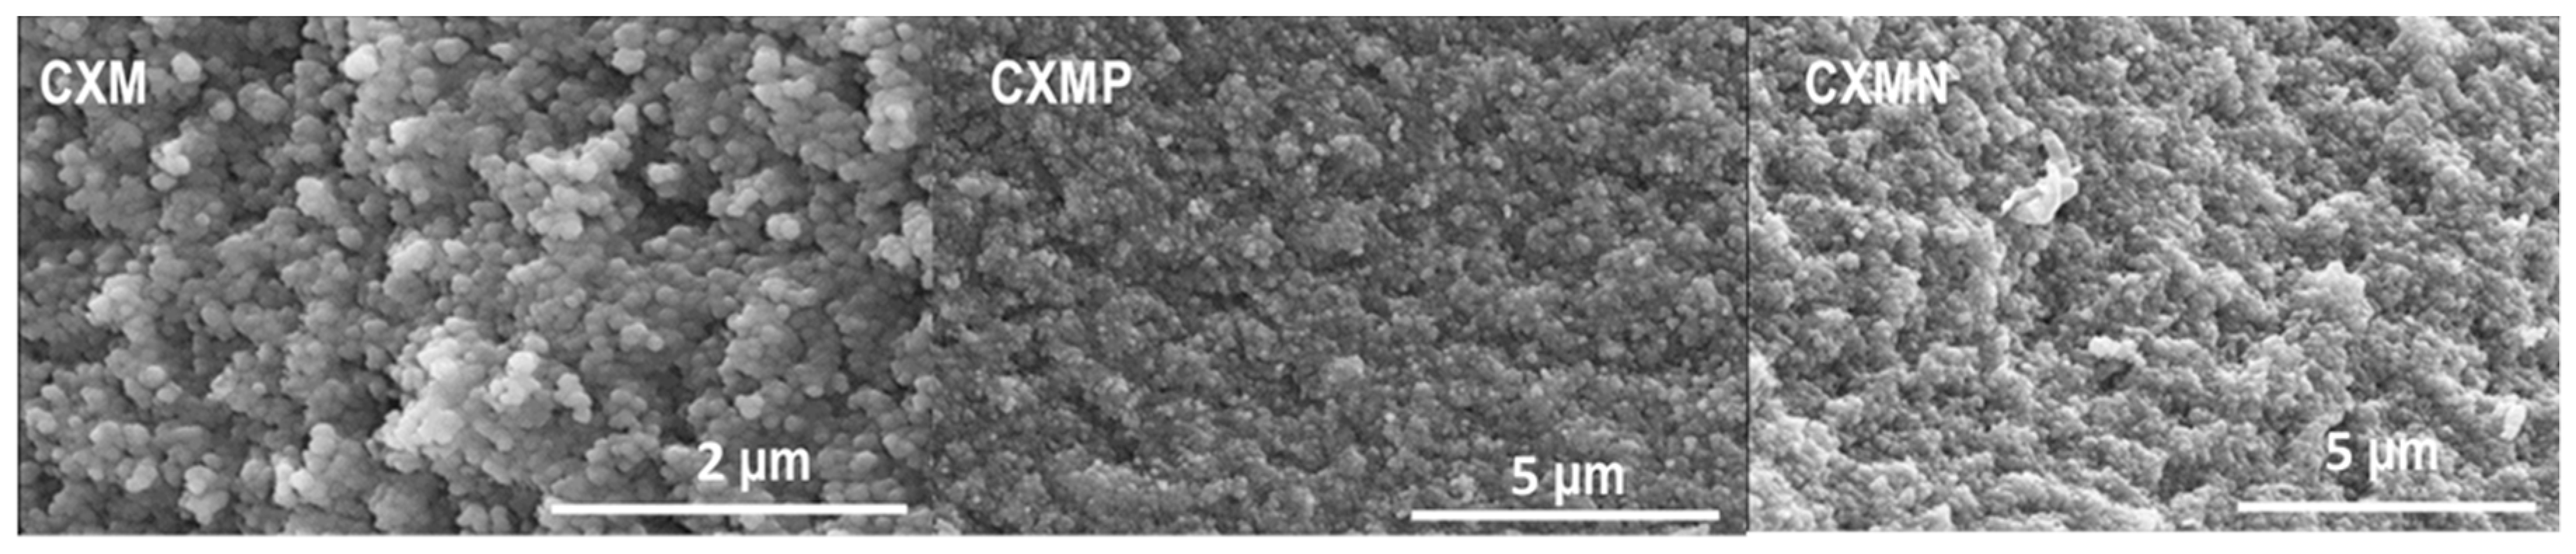 Dual-Purpose Materials Based on Carbon Xerogel Microspheres (CXMs) for Delayed Release of Cannabidiol (CBD)